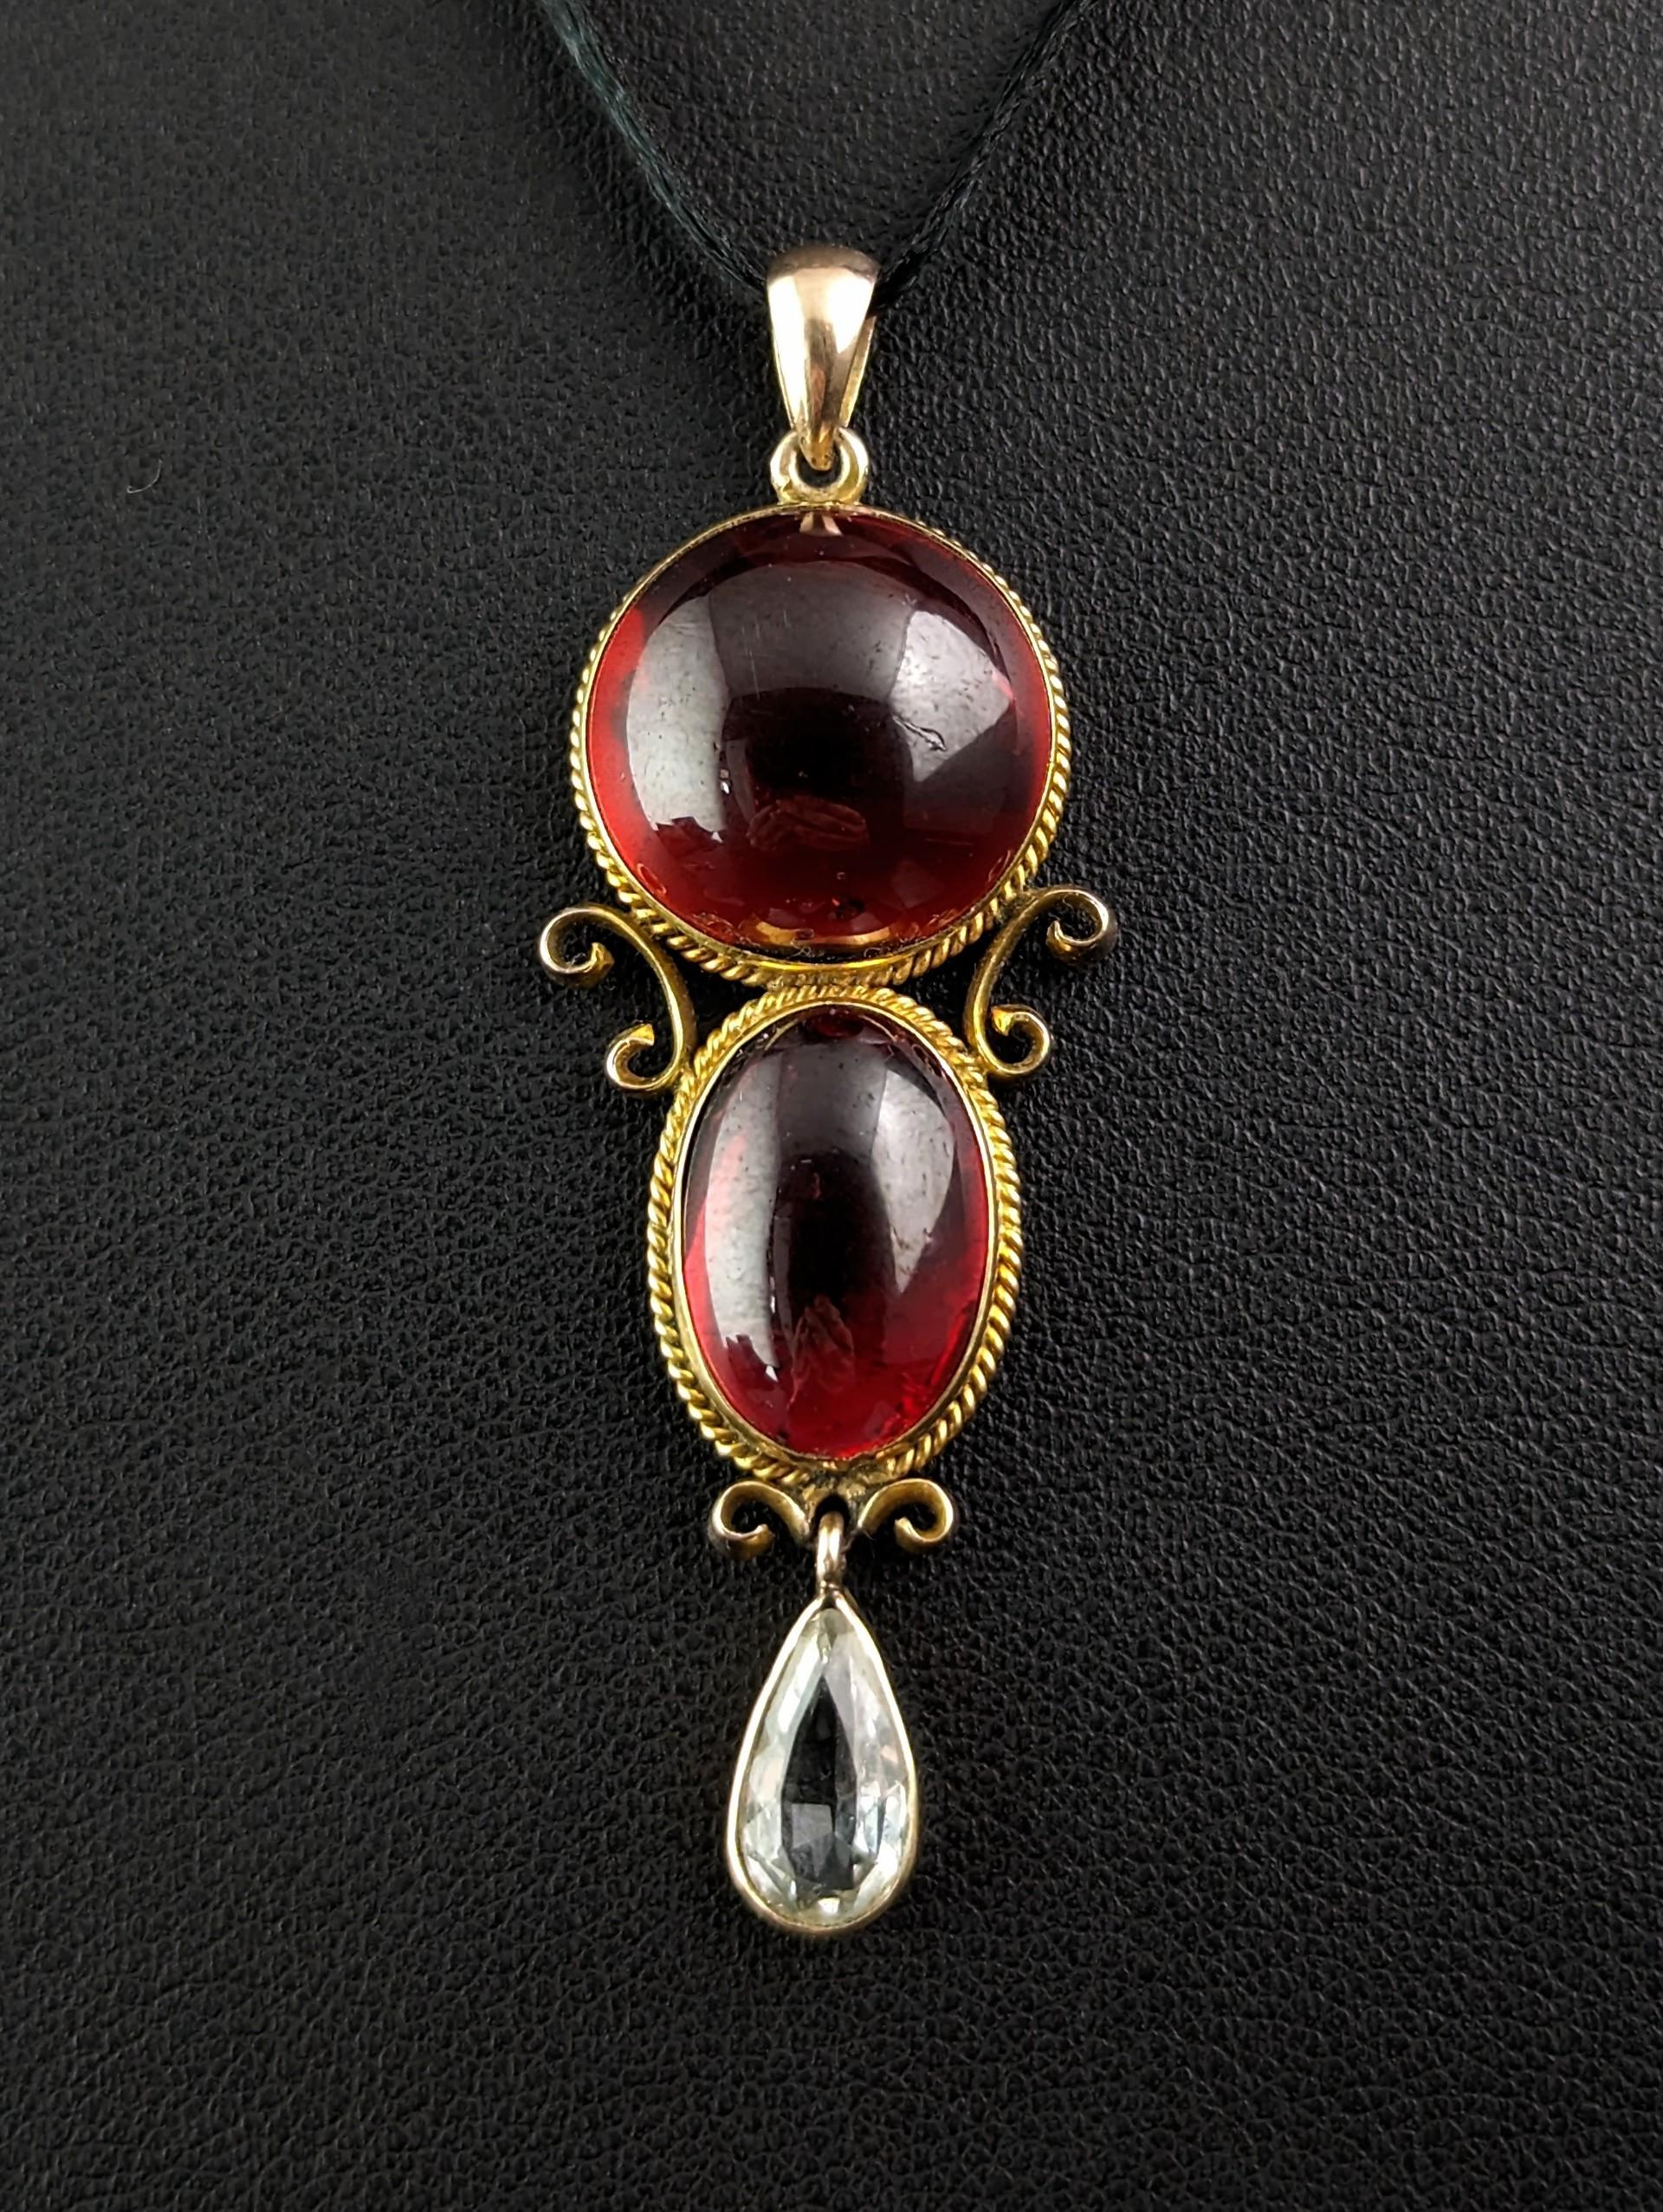 This antique foiled back Cabochon Garnet pendant is the epitome of Victorian beauty in jewellery.

The rich colours and elegant styling give this piece a real luxe feel and and I don't know about you but it is hard to resist such juicy cabochon